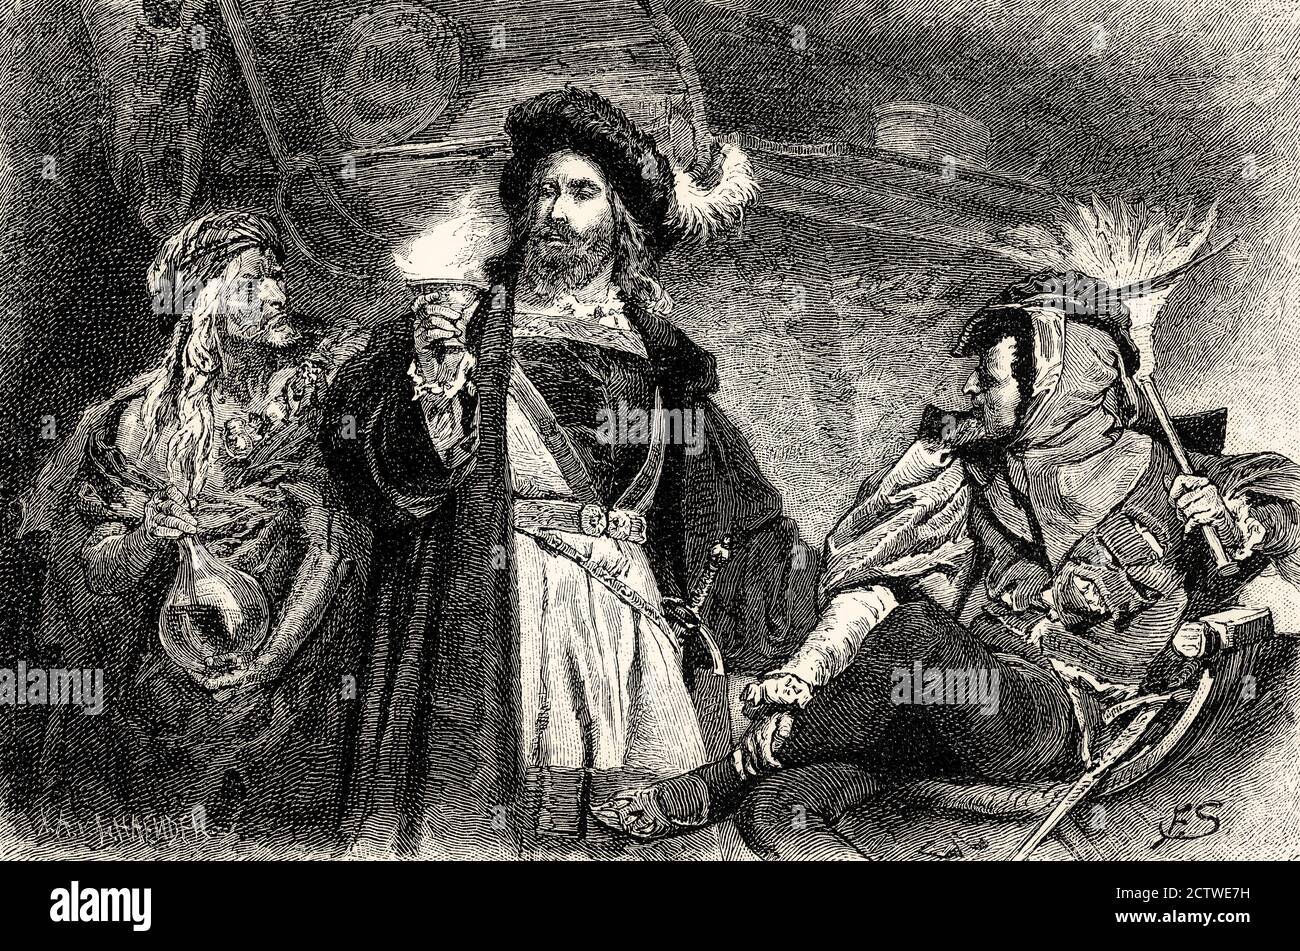 Mephistopheles, witch, Faust, first part of the tragic play Faust by Johann Wolfgang von Goethe Stock Photo